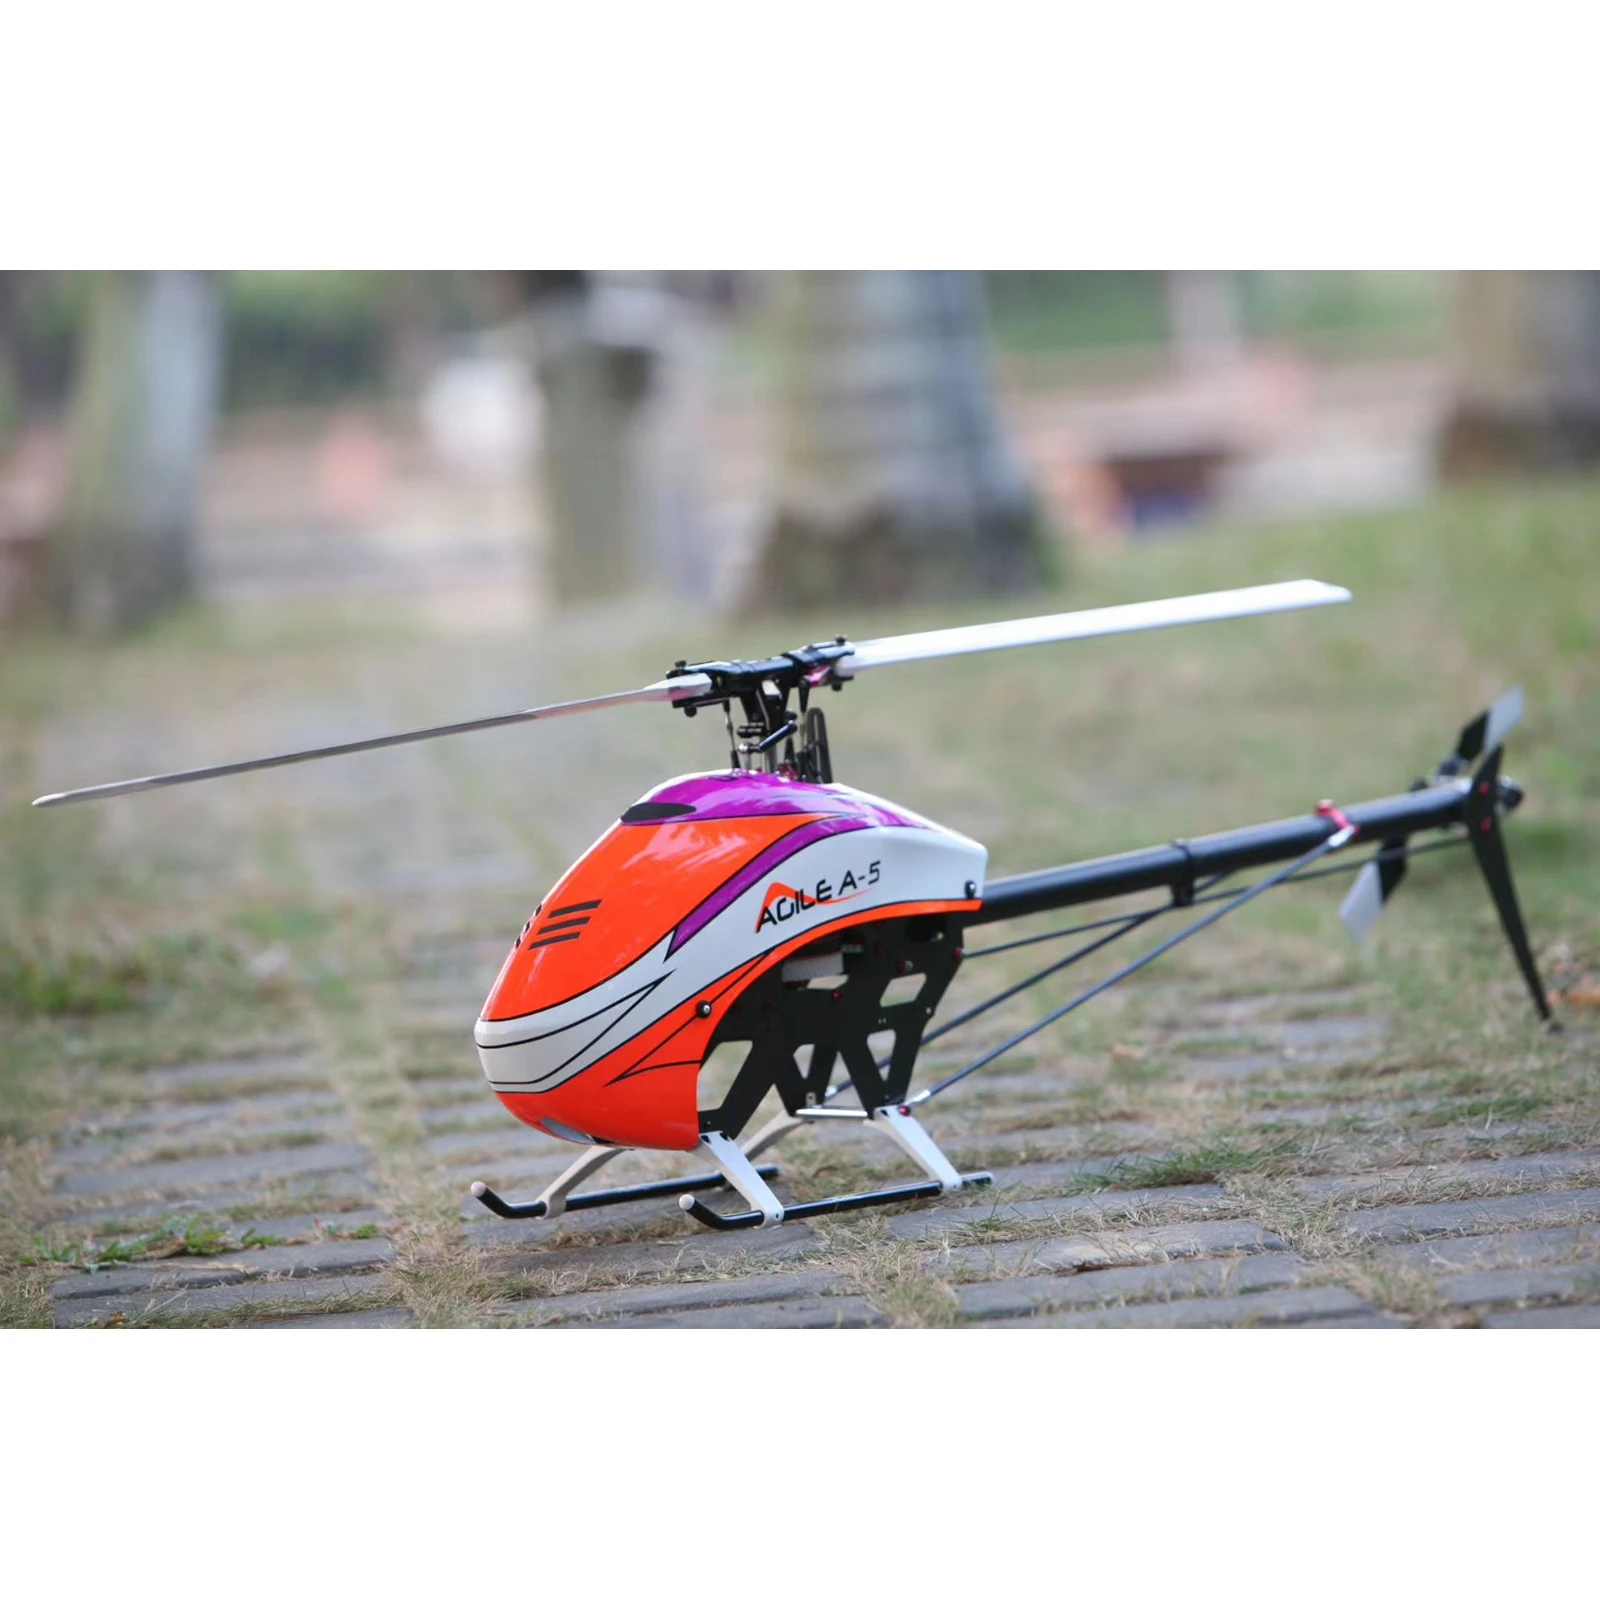 

KDS AGILE A5 6CH 3D Flybarless 550 Class Belt Drive RC Helicopter Kit